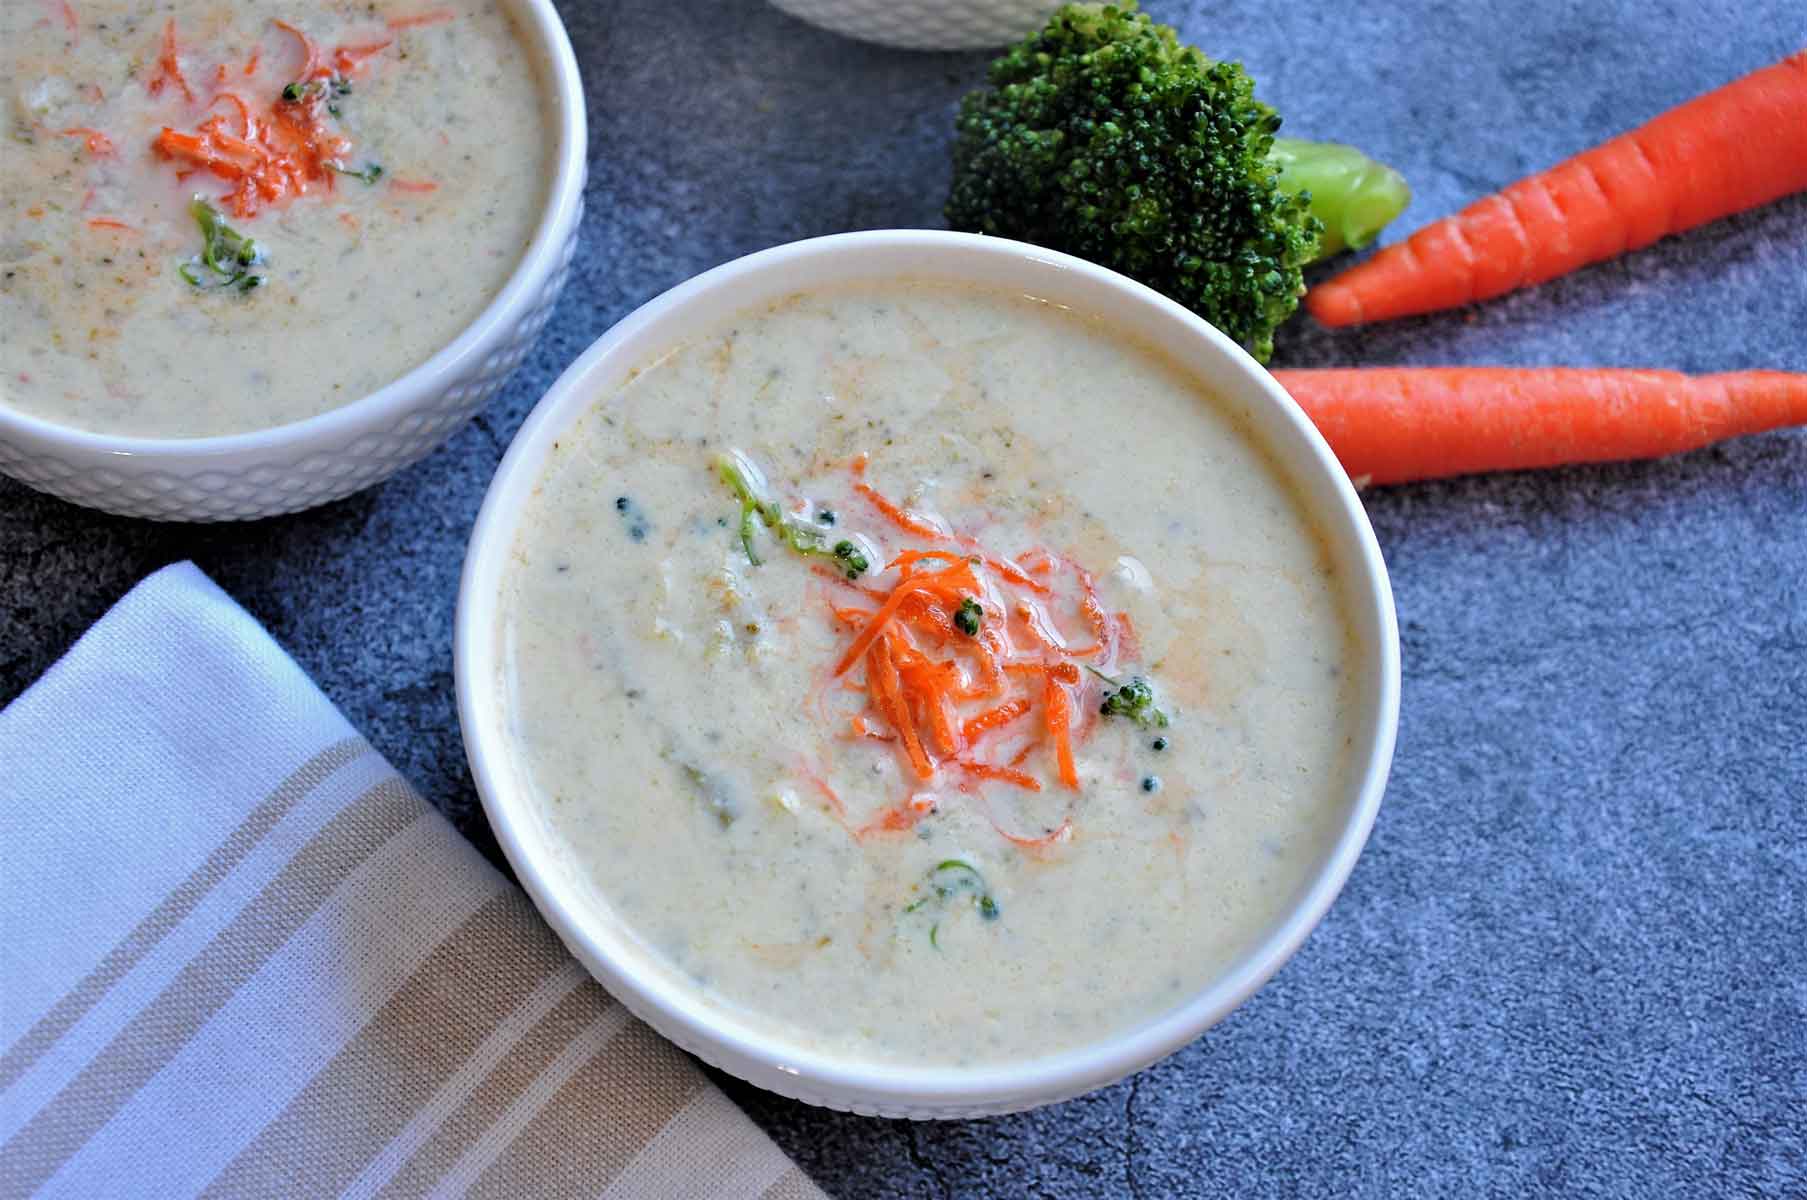 Broccoli cheese soup in a bowl.